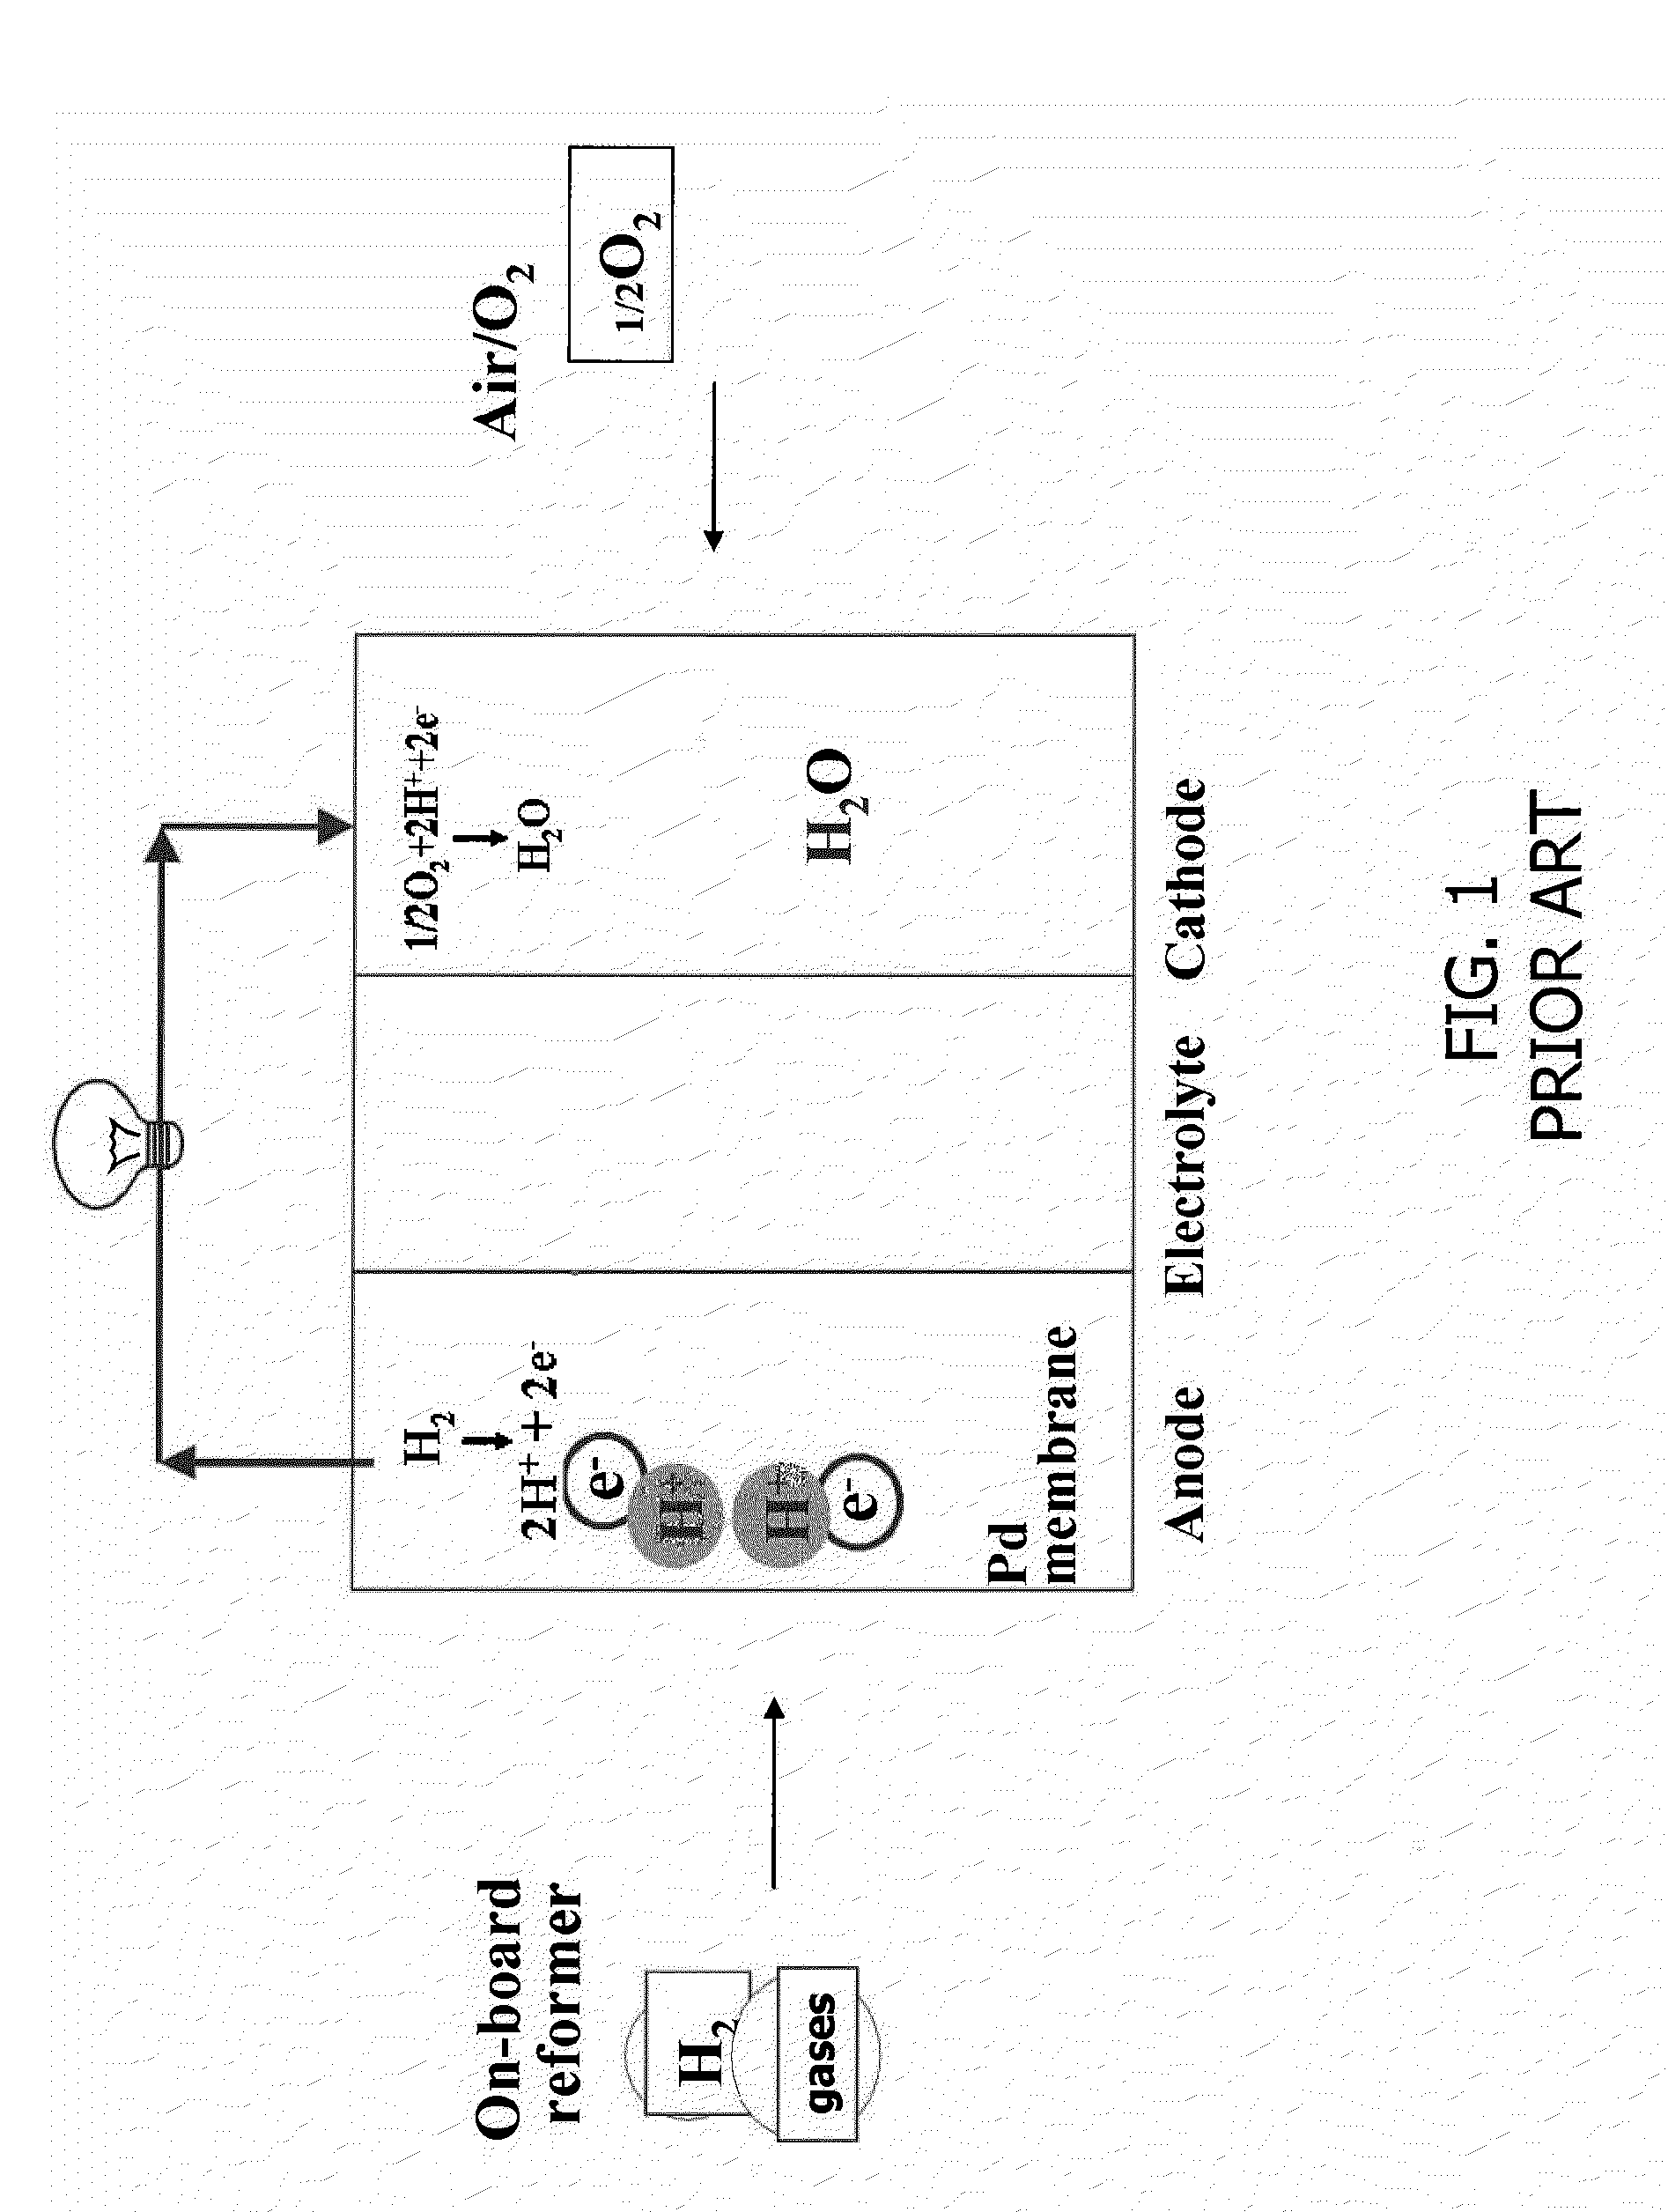 Ion-Conducting Ceramic Apparatus, Method, Fabrication, and Applications